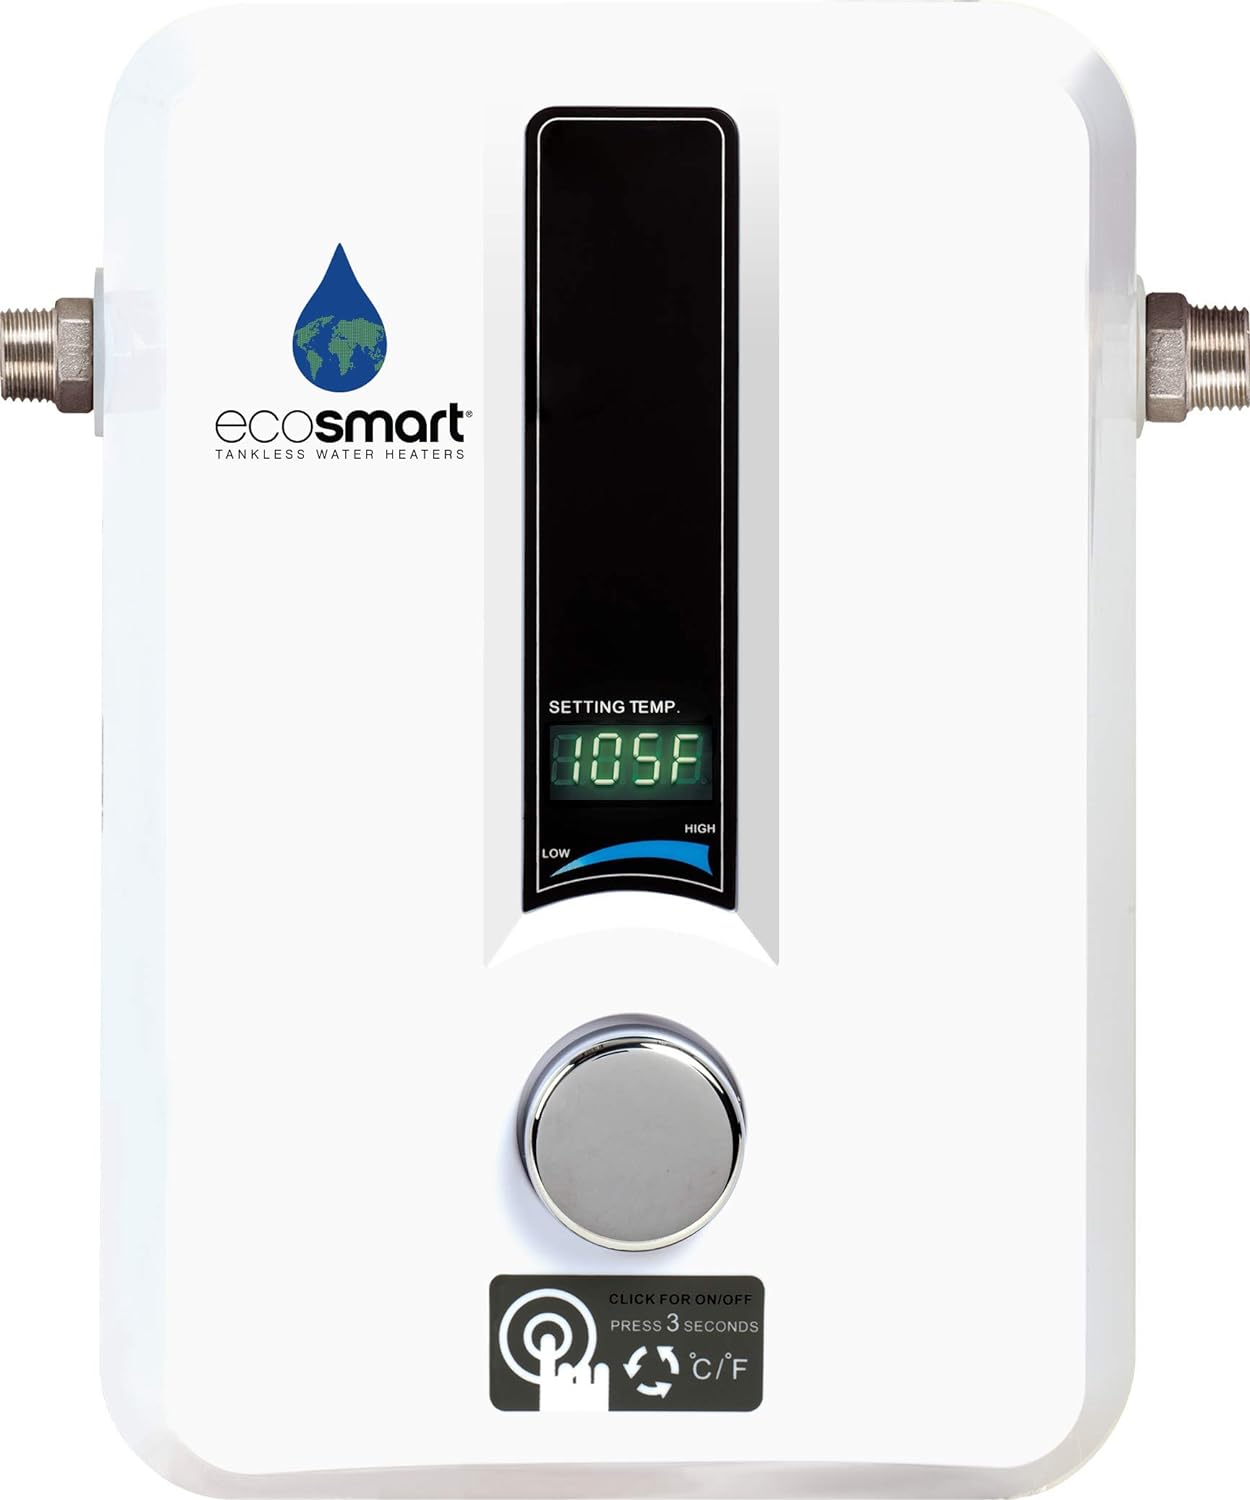 EcoSmart ECO 11 Electric Tankless Water Heater Review